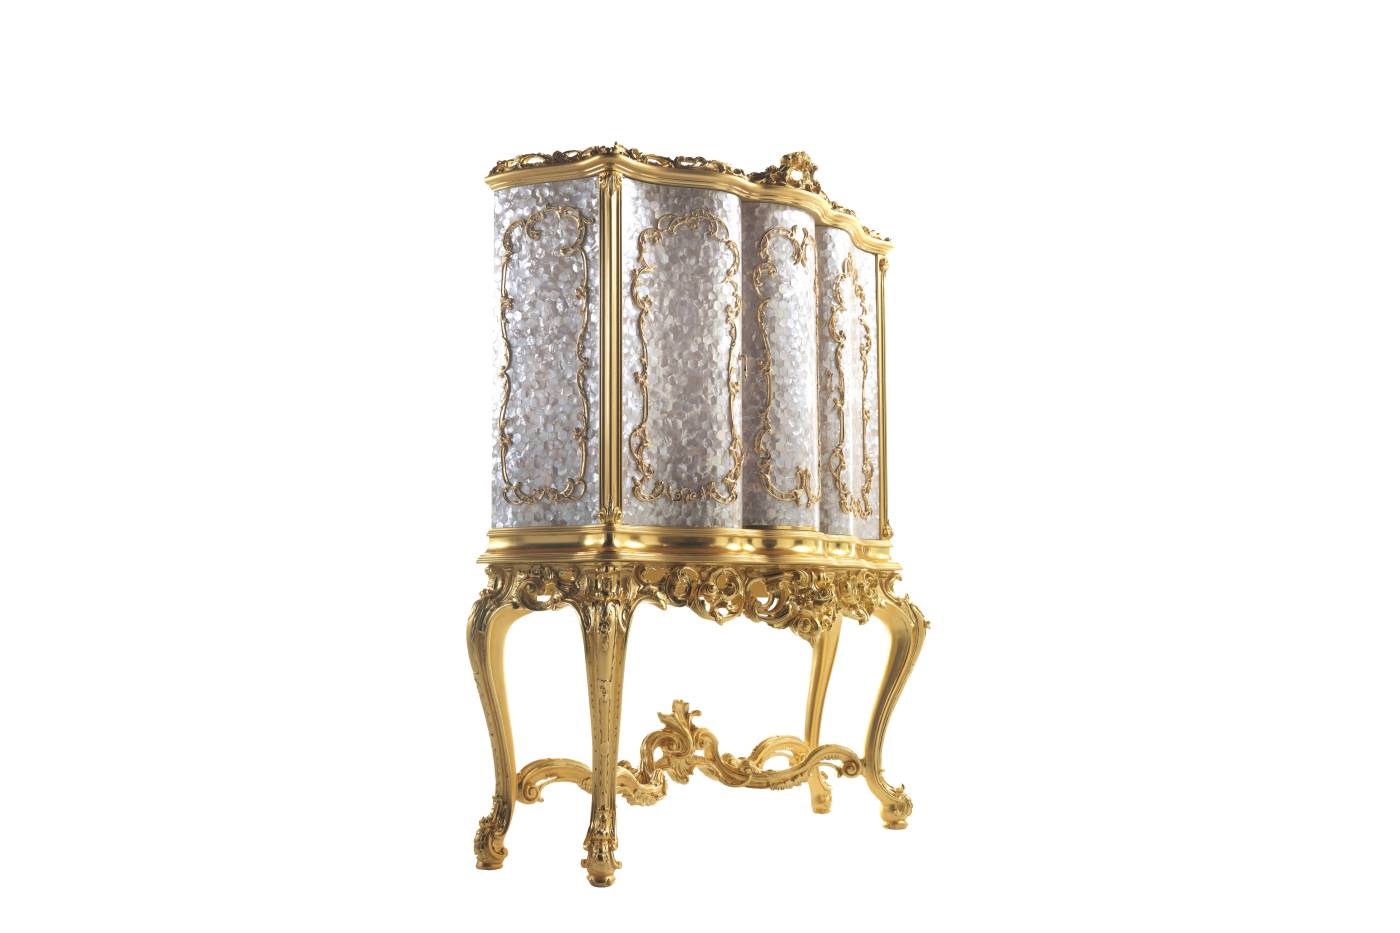 VILLA SERBELLONI cabinet - convey elegance to each space with italian classic masterpieces of the classic Masterpieces collection